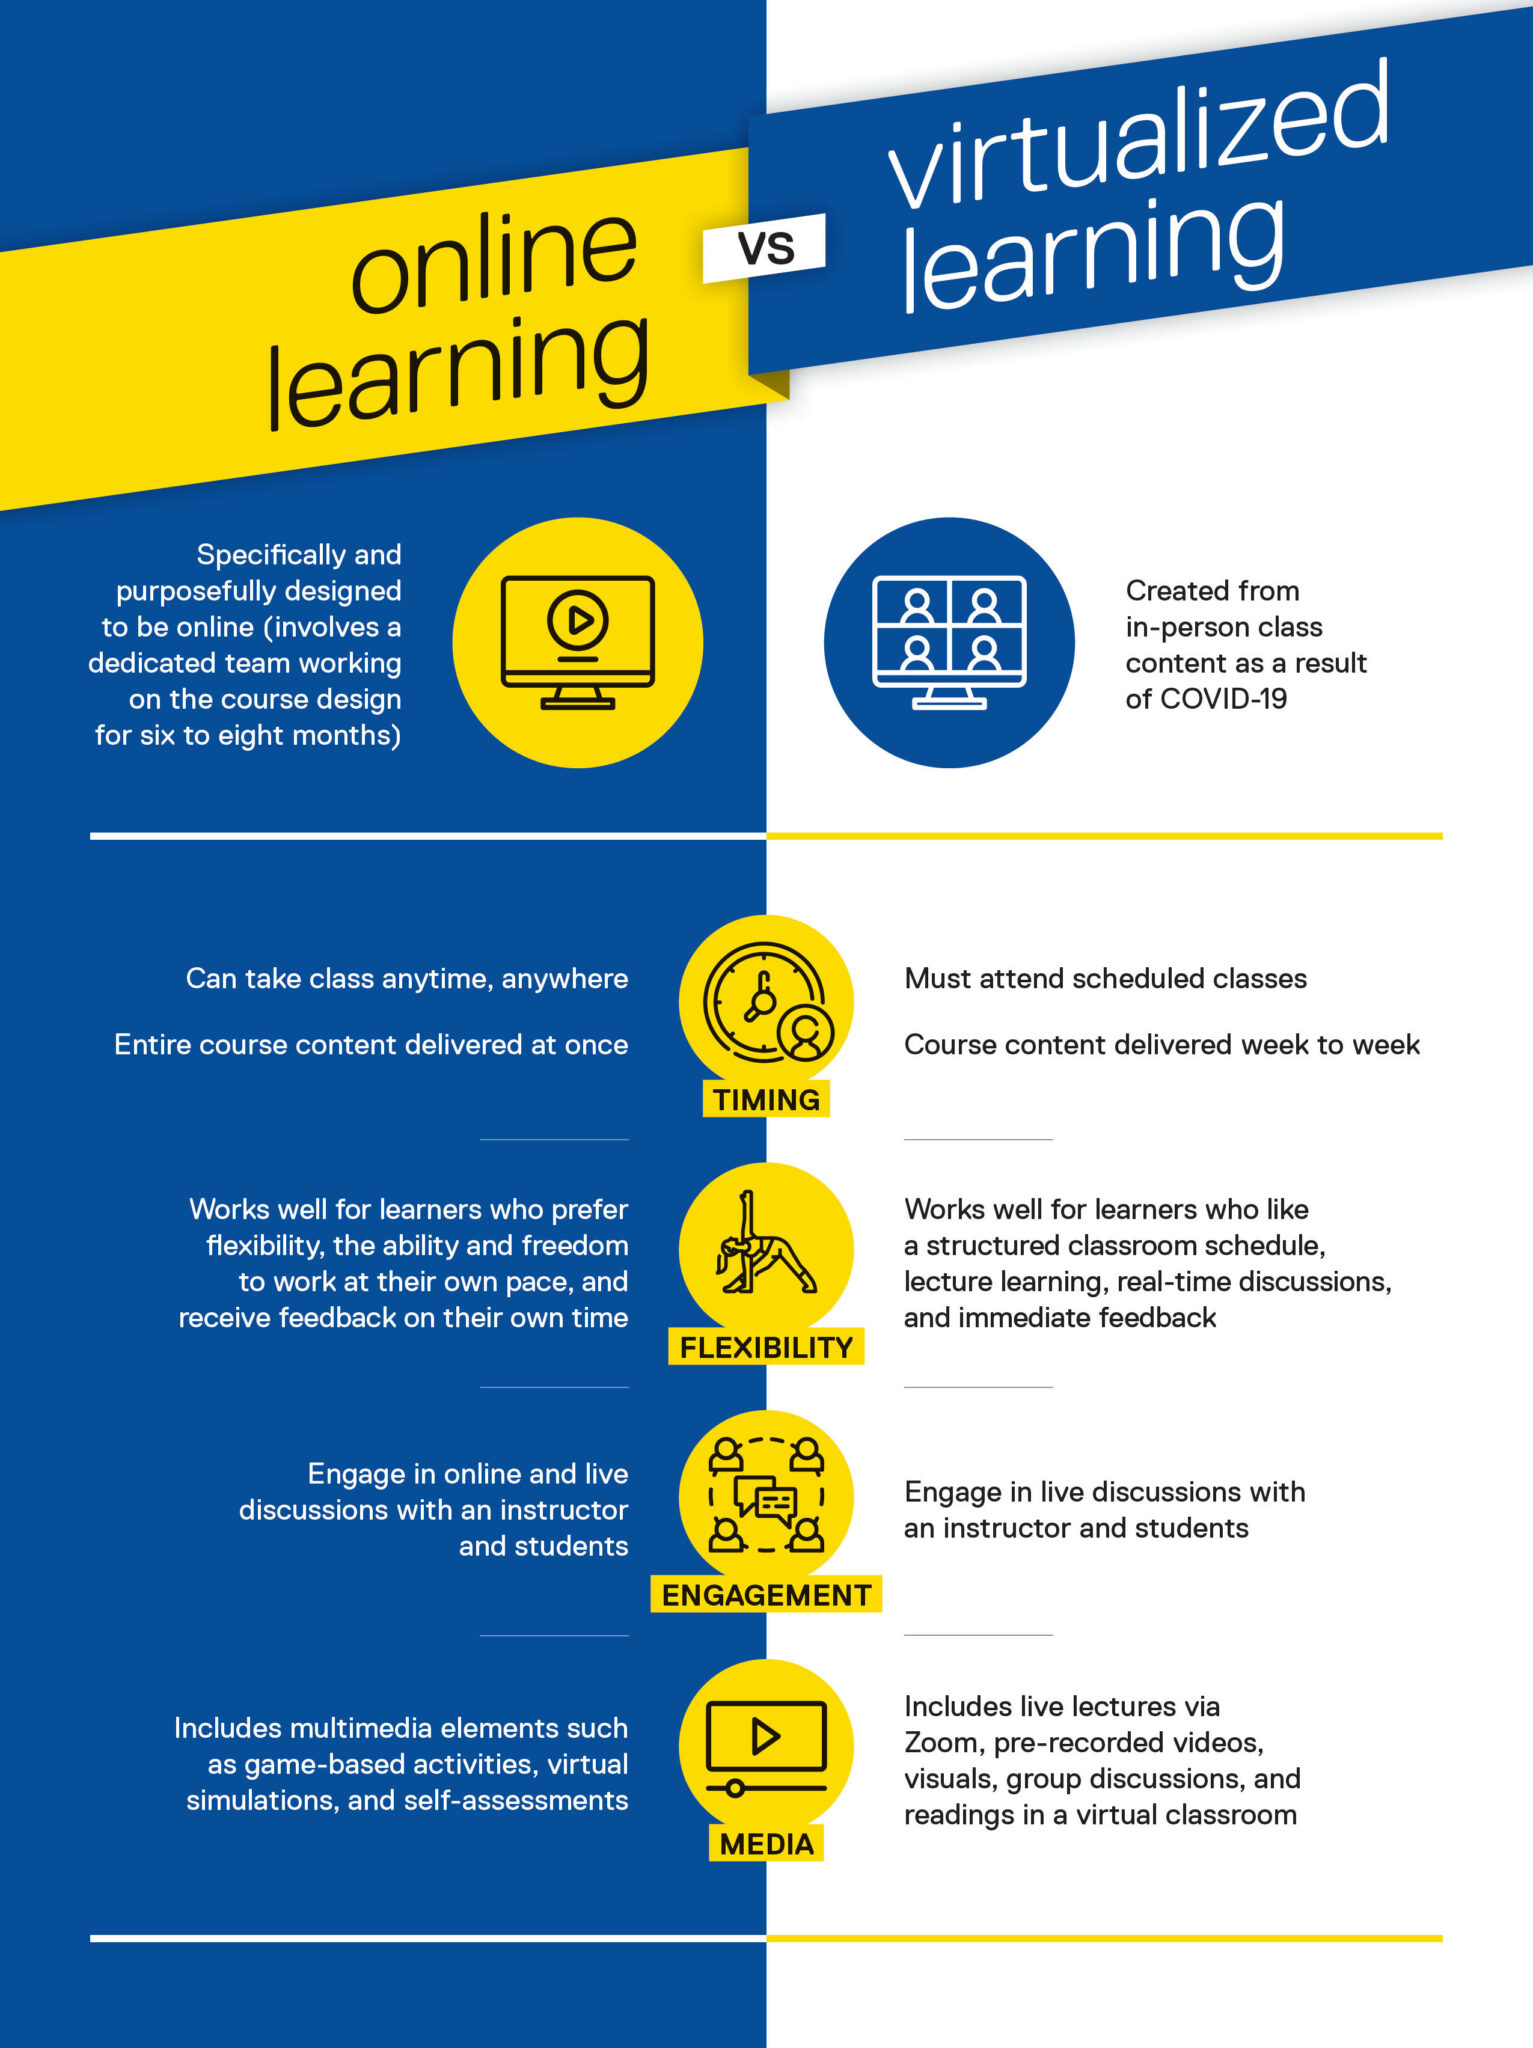 infographic for online learning vs. virtualized learning